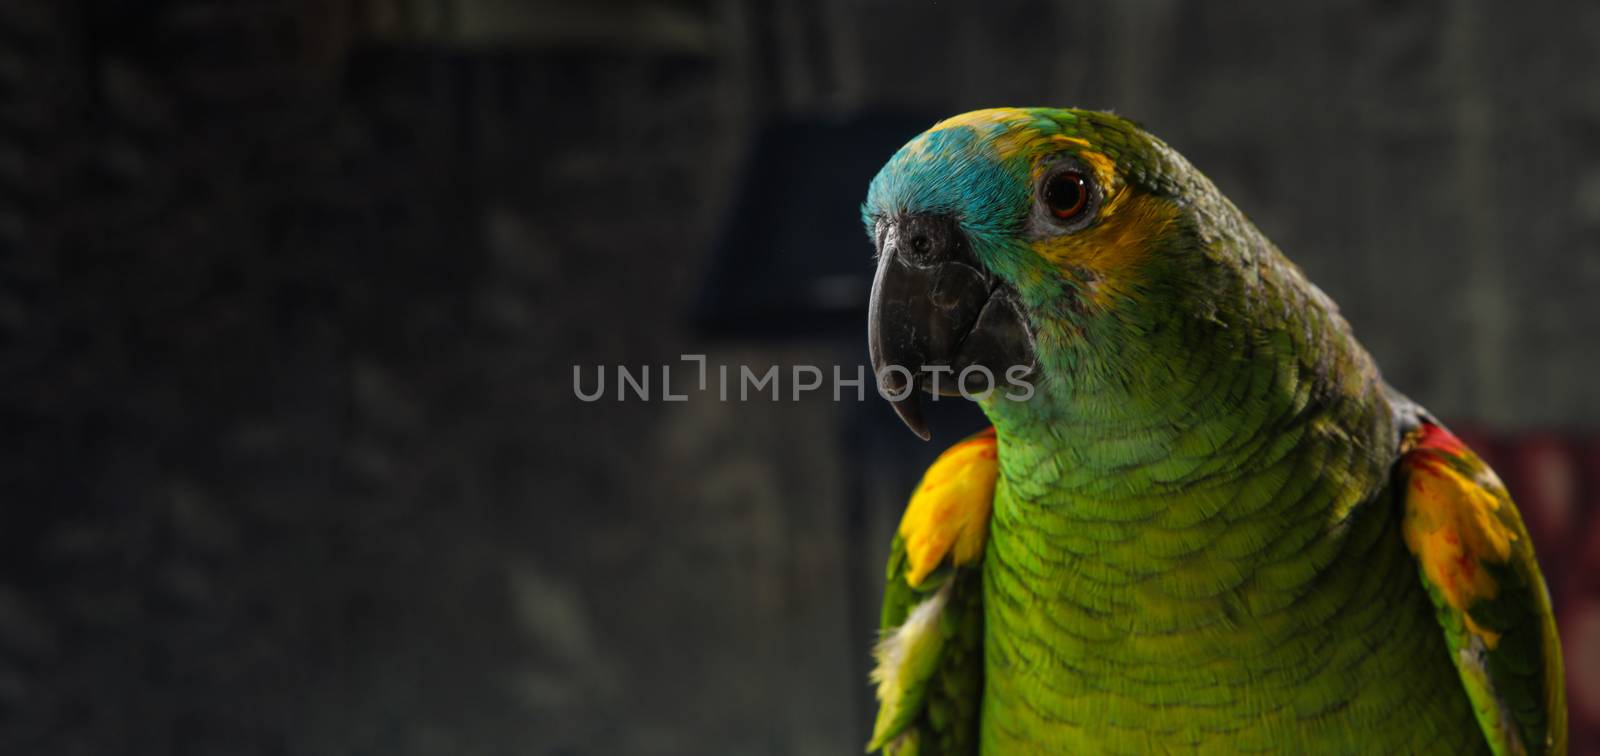 parrot playing and posing in photo studio